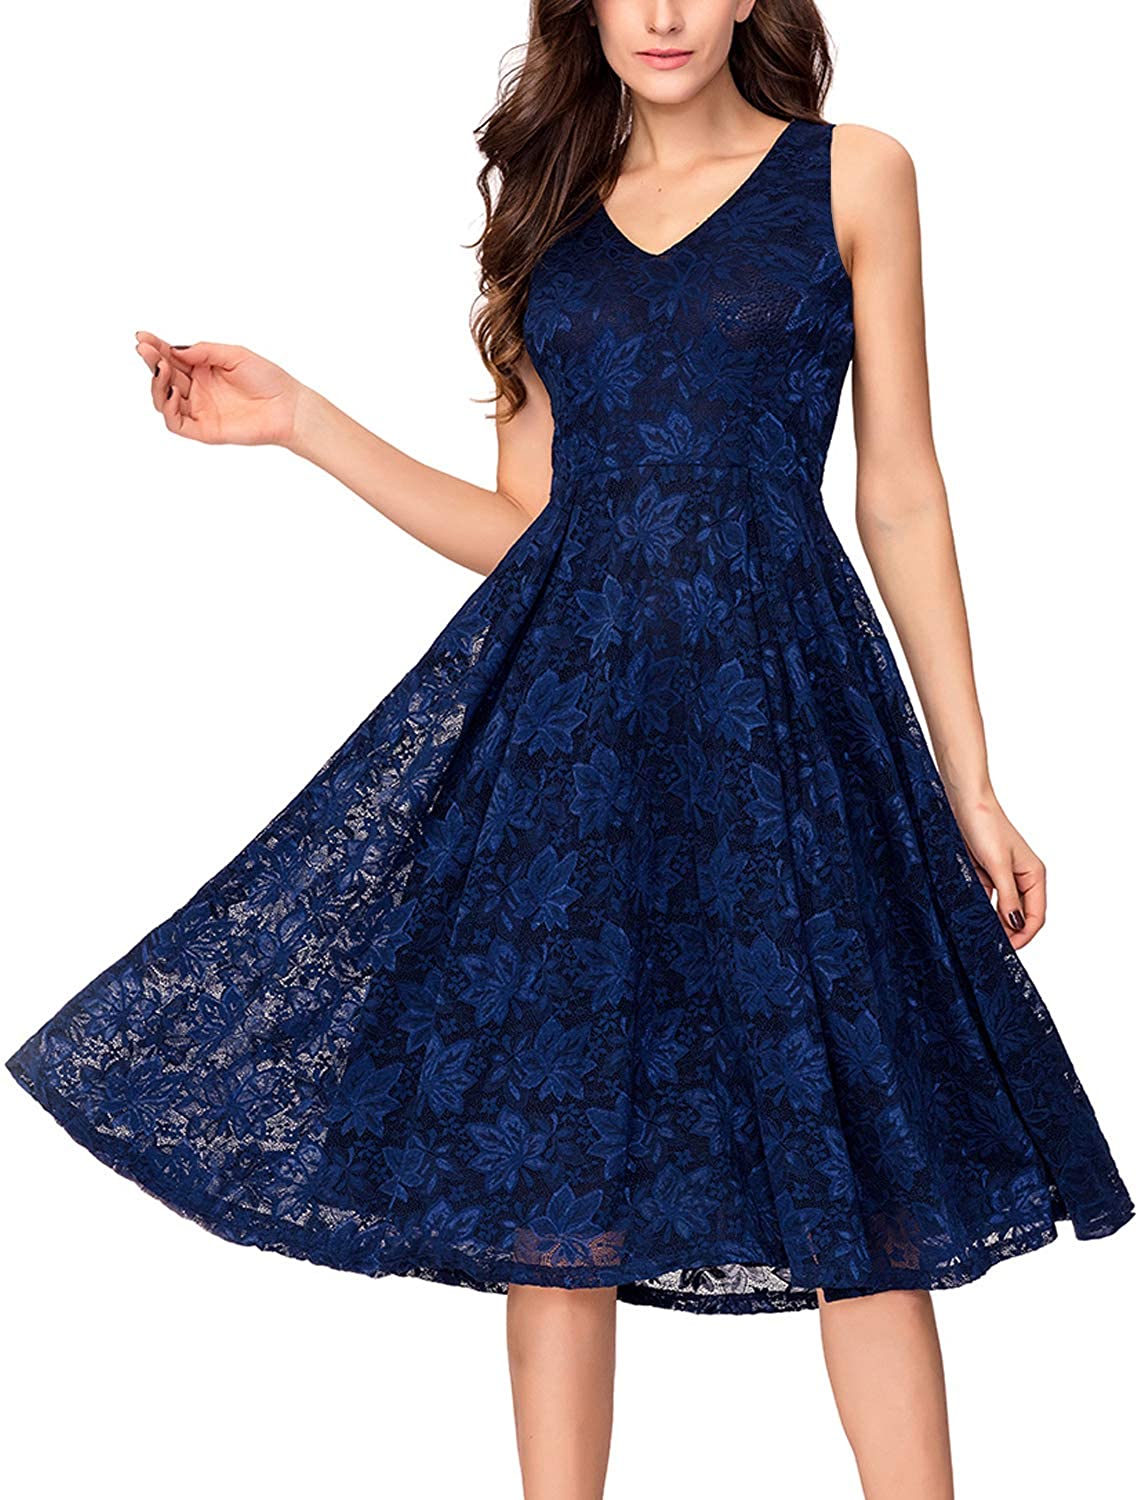 Price:$28.89    Noctflos Lace V Neck Fit & Flare Midi Cocktail Dress for Women Party Wedding  Clothing